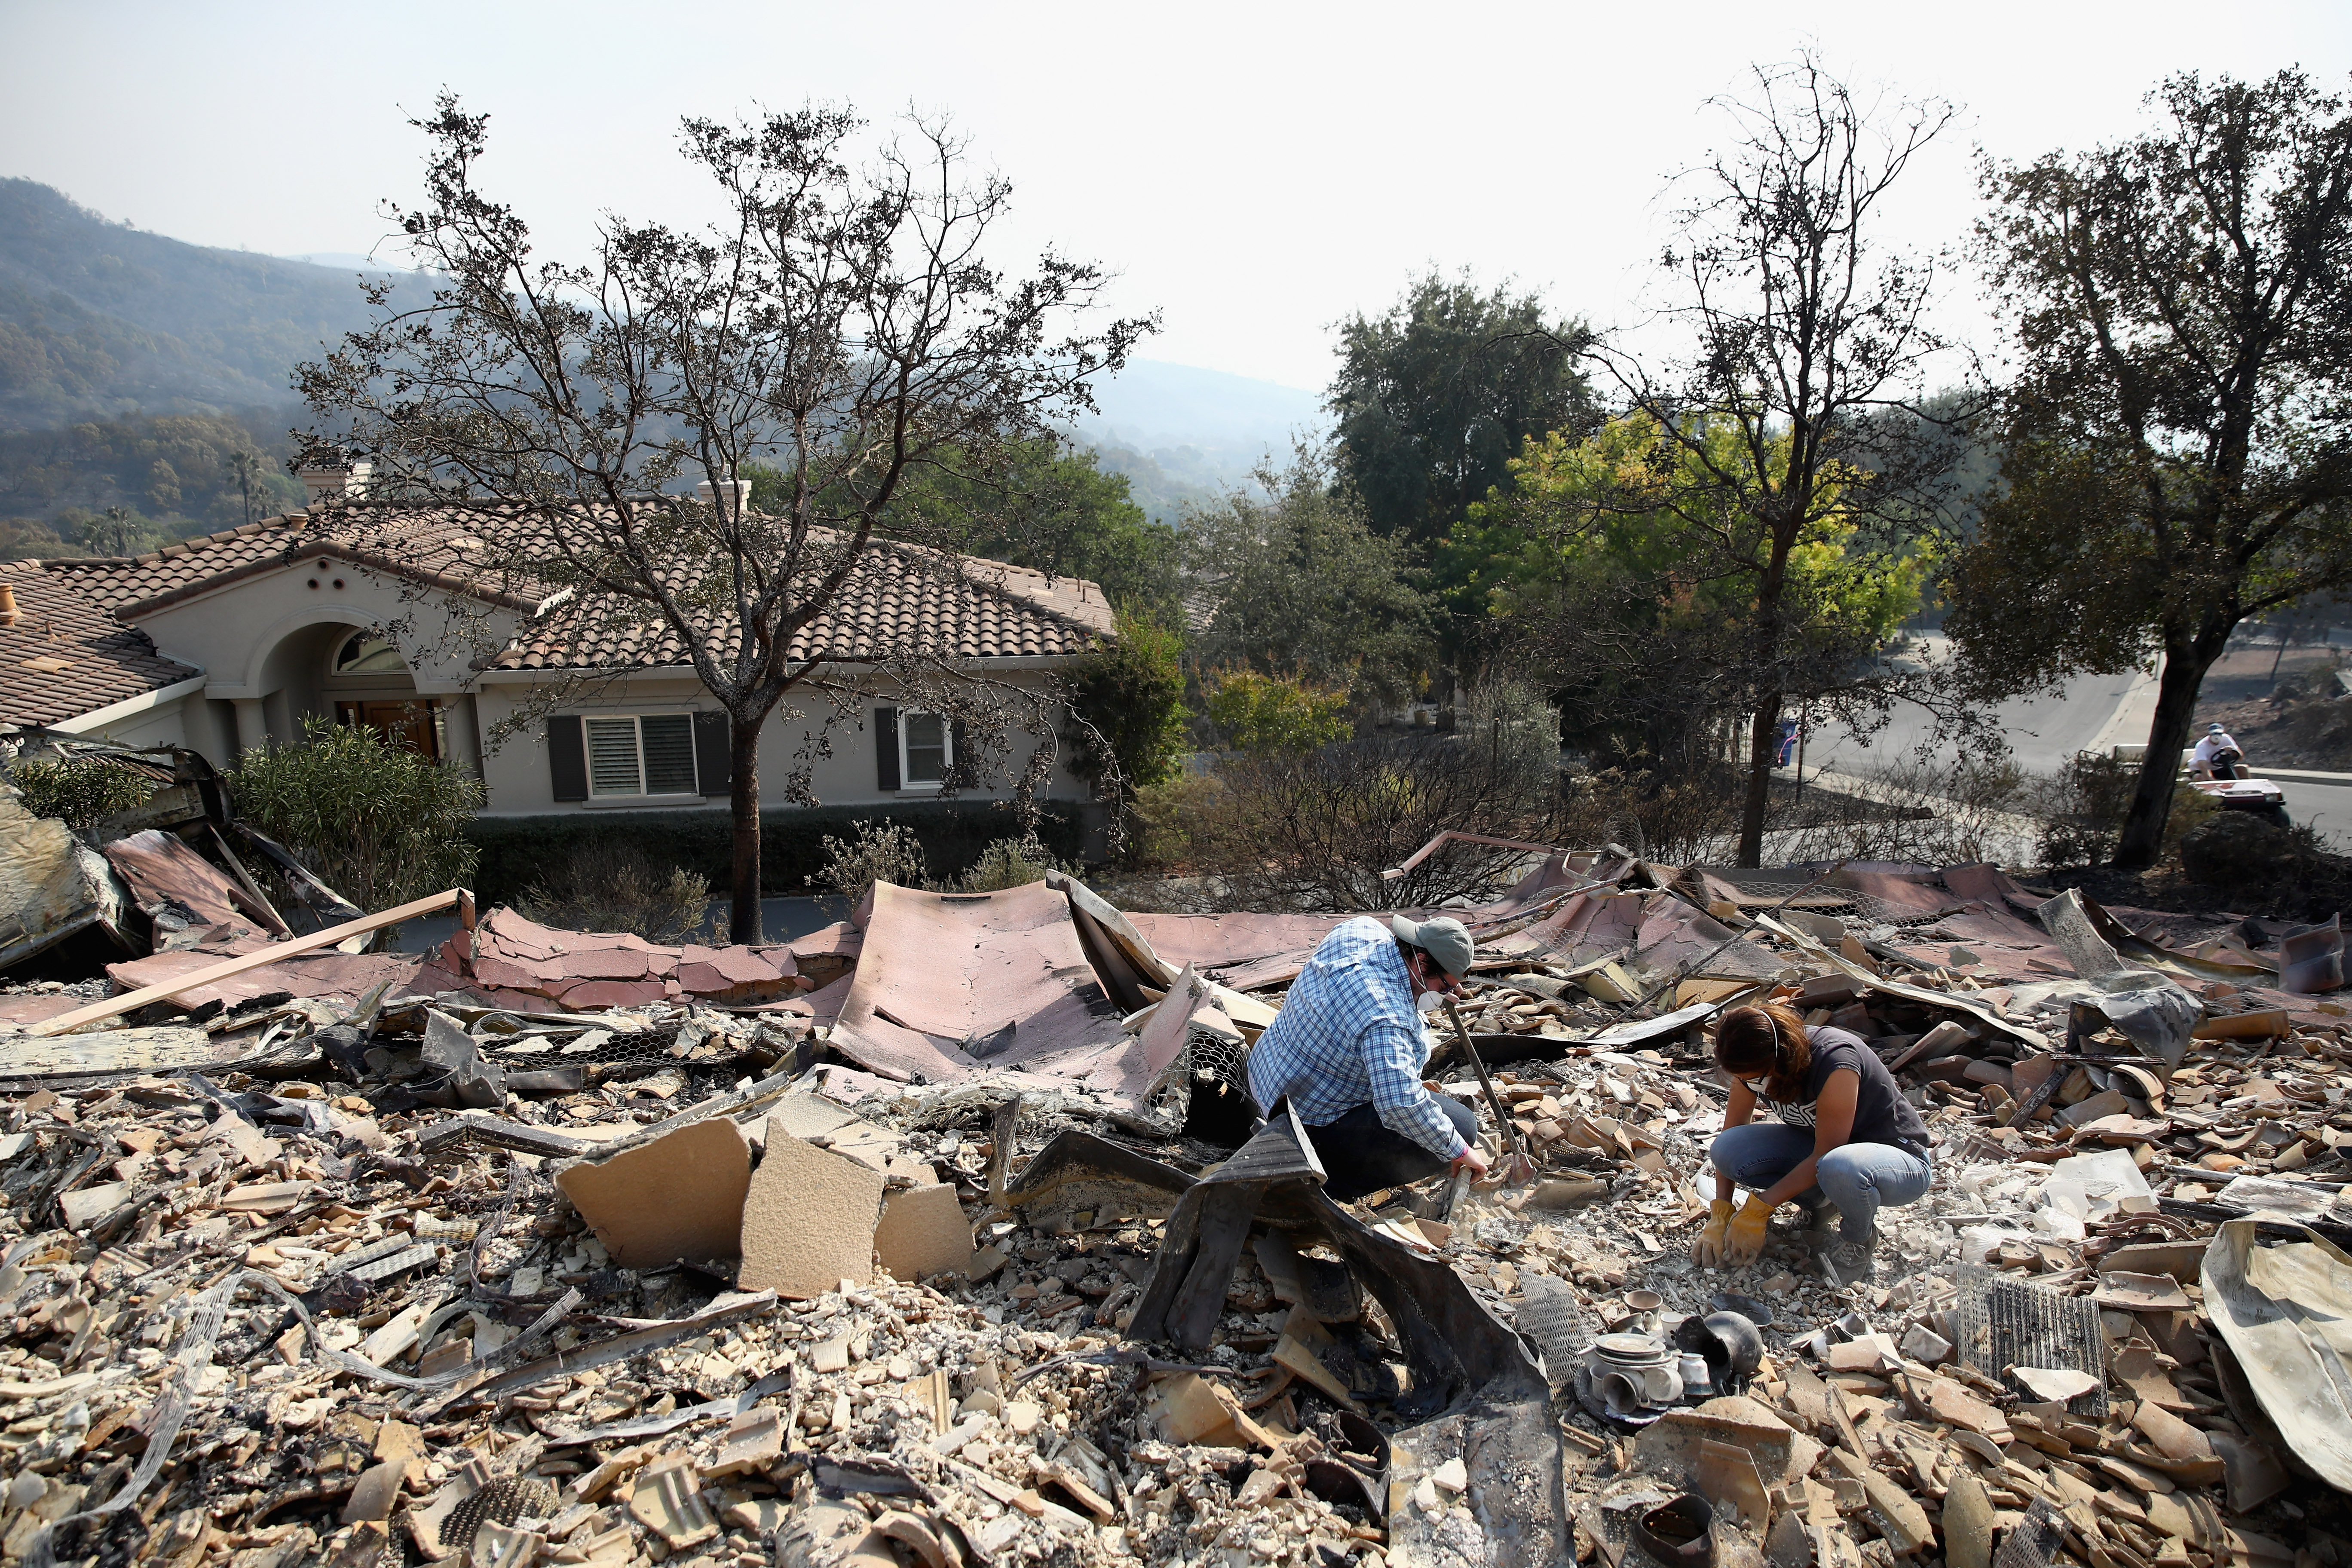 How to Help the Napa Fire Victims: 7 Effective Ways to Donate